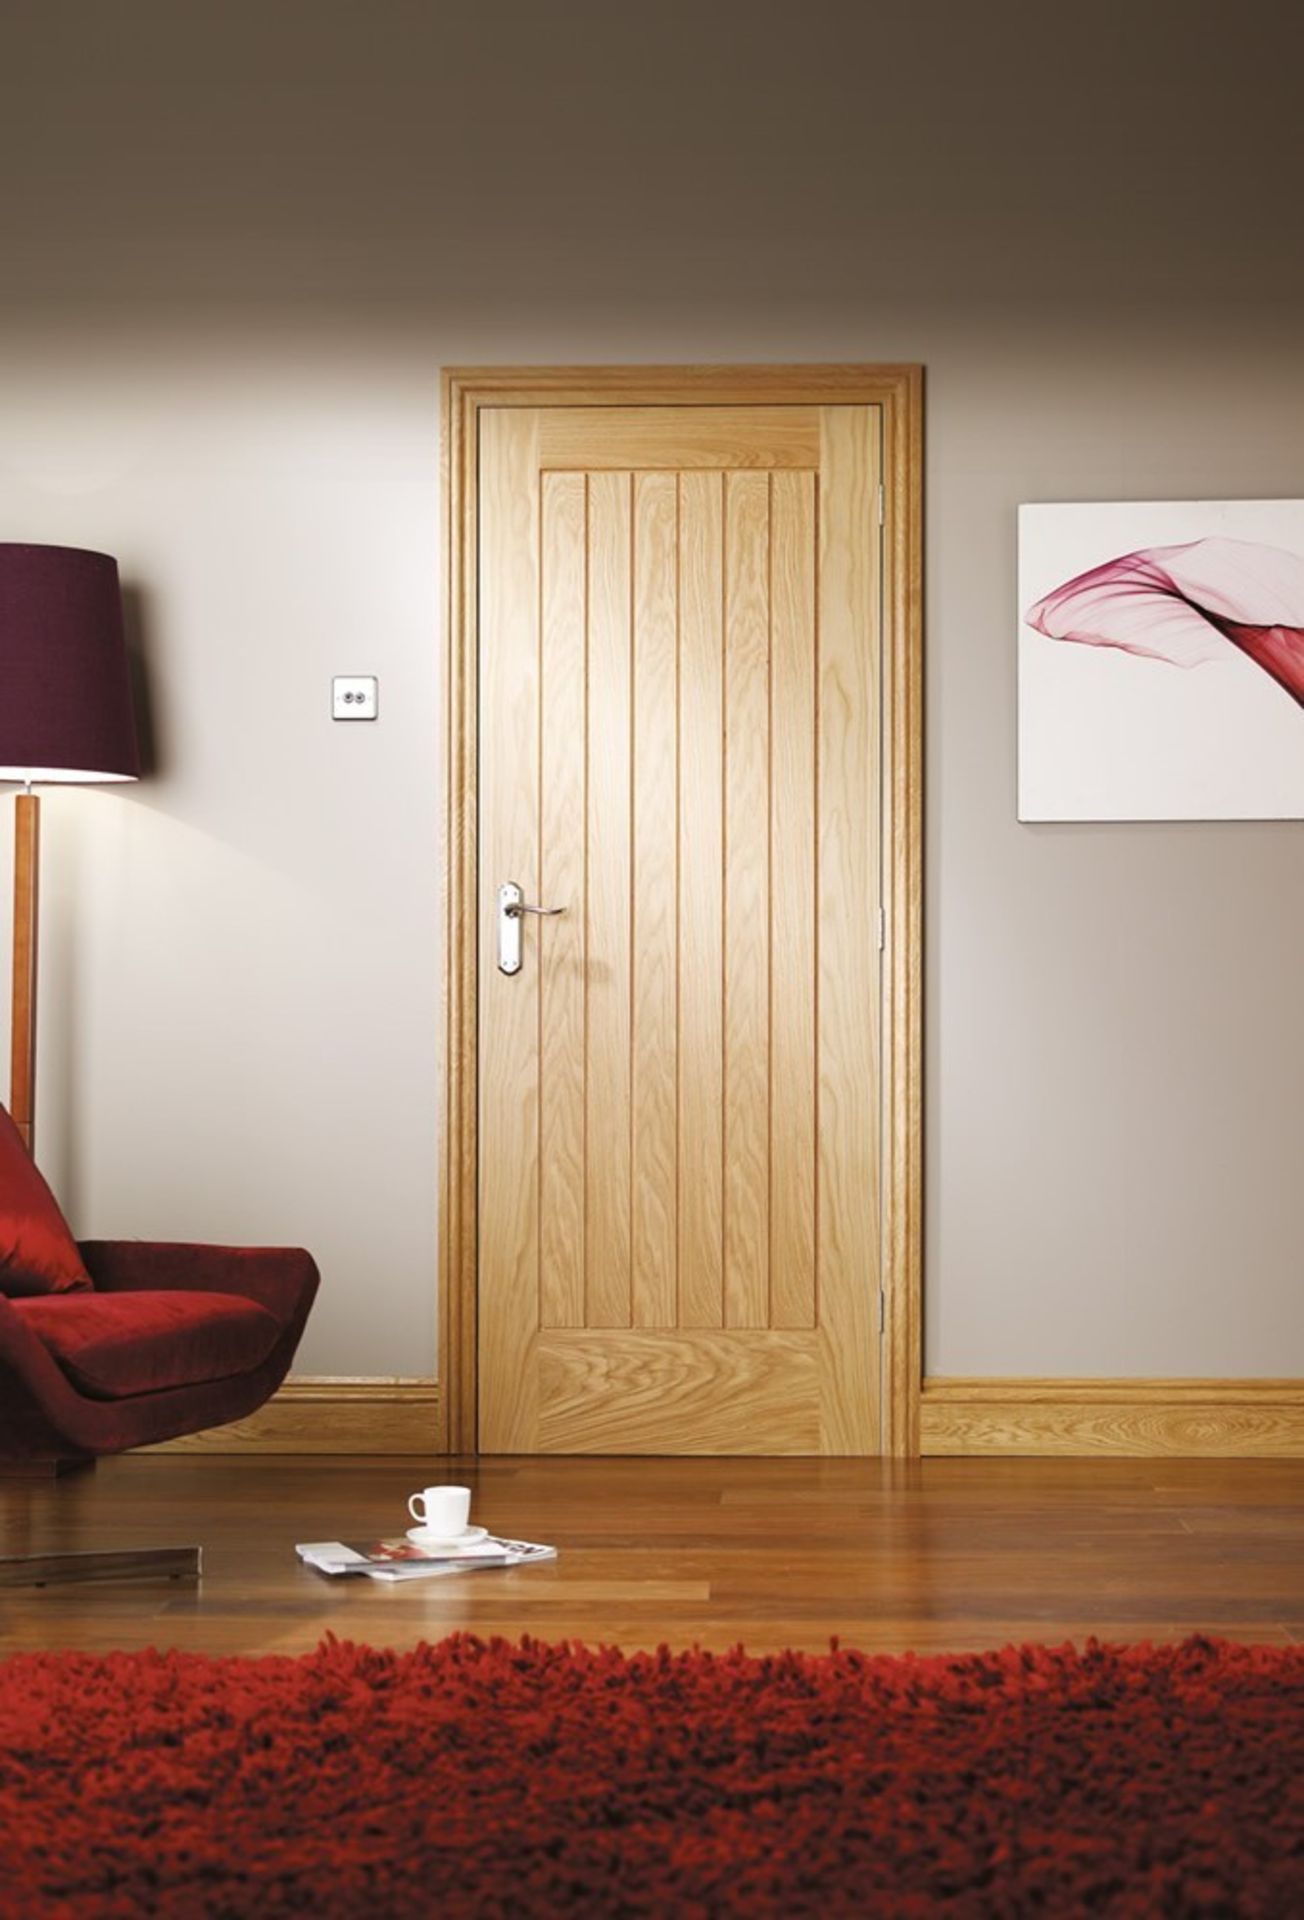 1 x Solid Oak Suffolk Internal Door by XL Joinery - Unused / Sealed - Size: 198x84x4.5 cms - CL999 - - Image 3 of 3